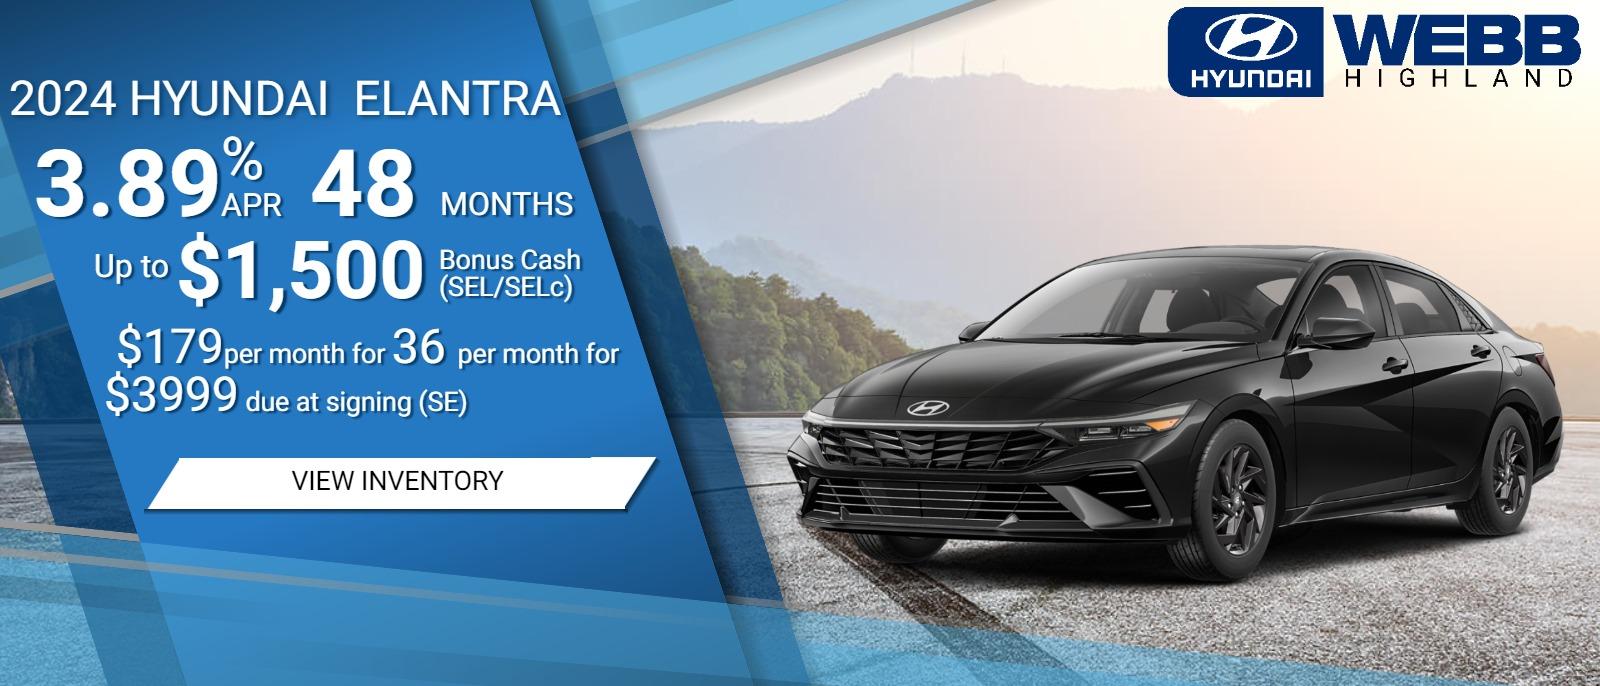 24MY ELANTRA
• 3.89% / 48 
• Up to $1,500 Bonus Cash (SEL/SELc) 
• $179 per month for 36 per month for /$3999 due at signing (SE)